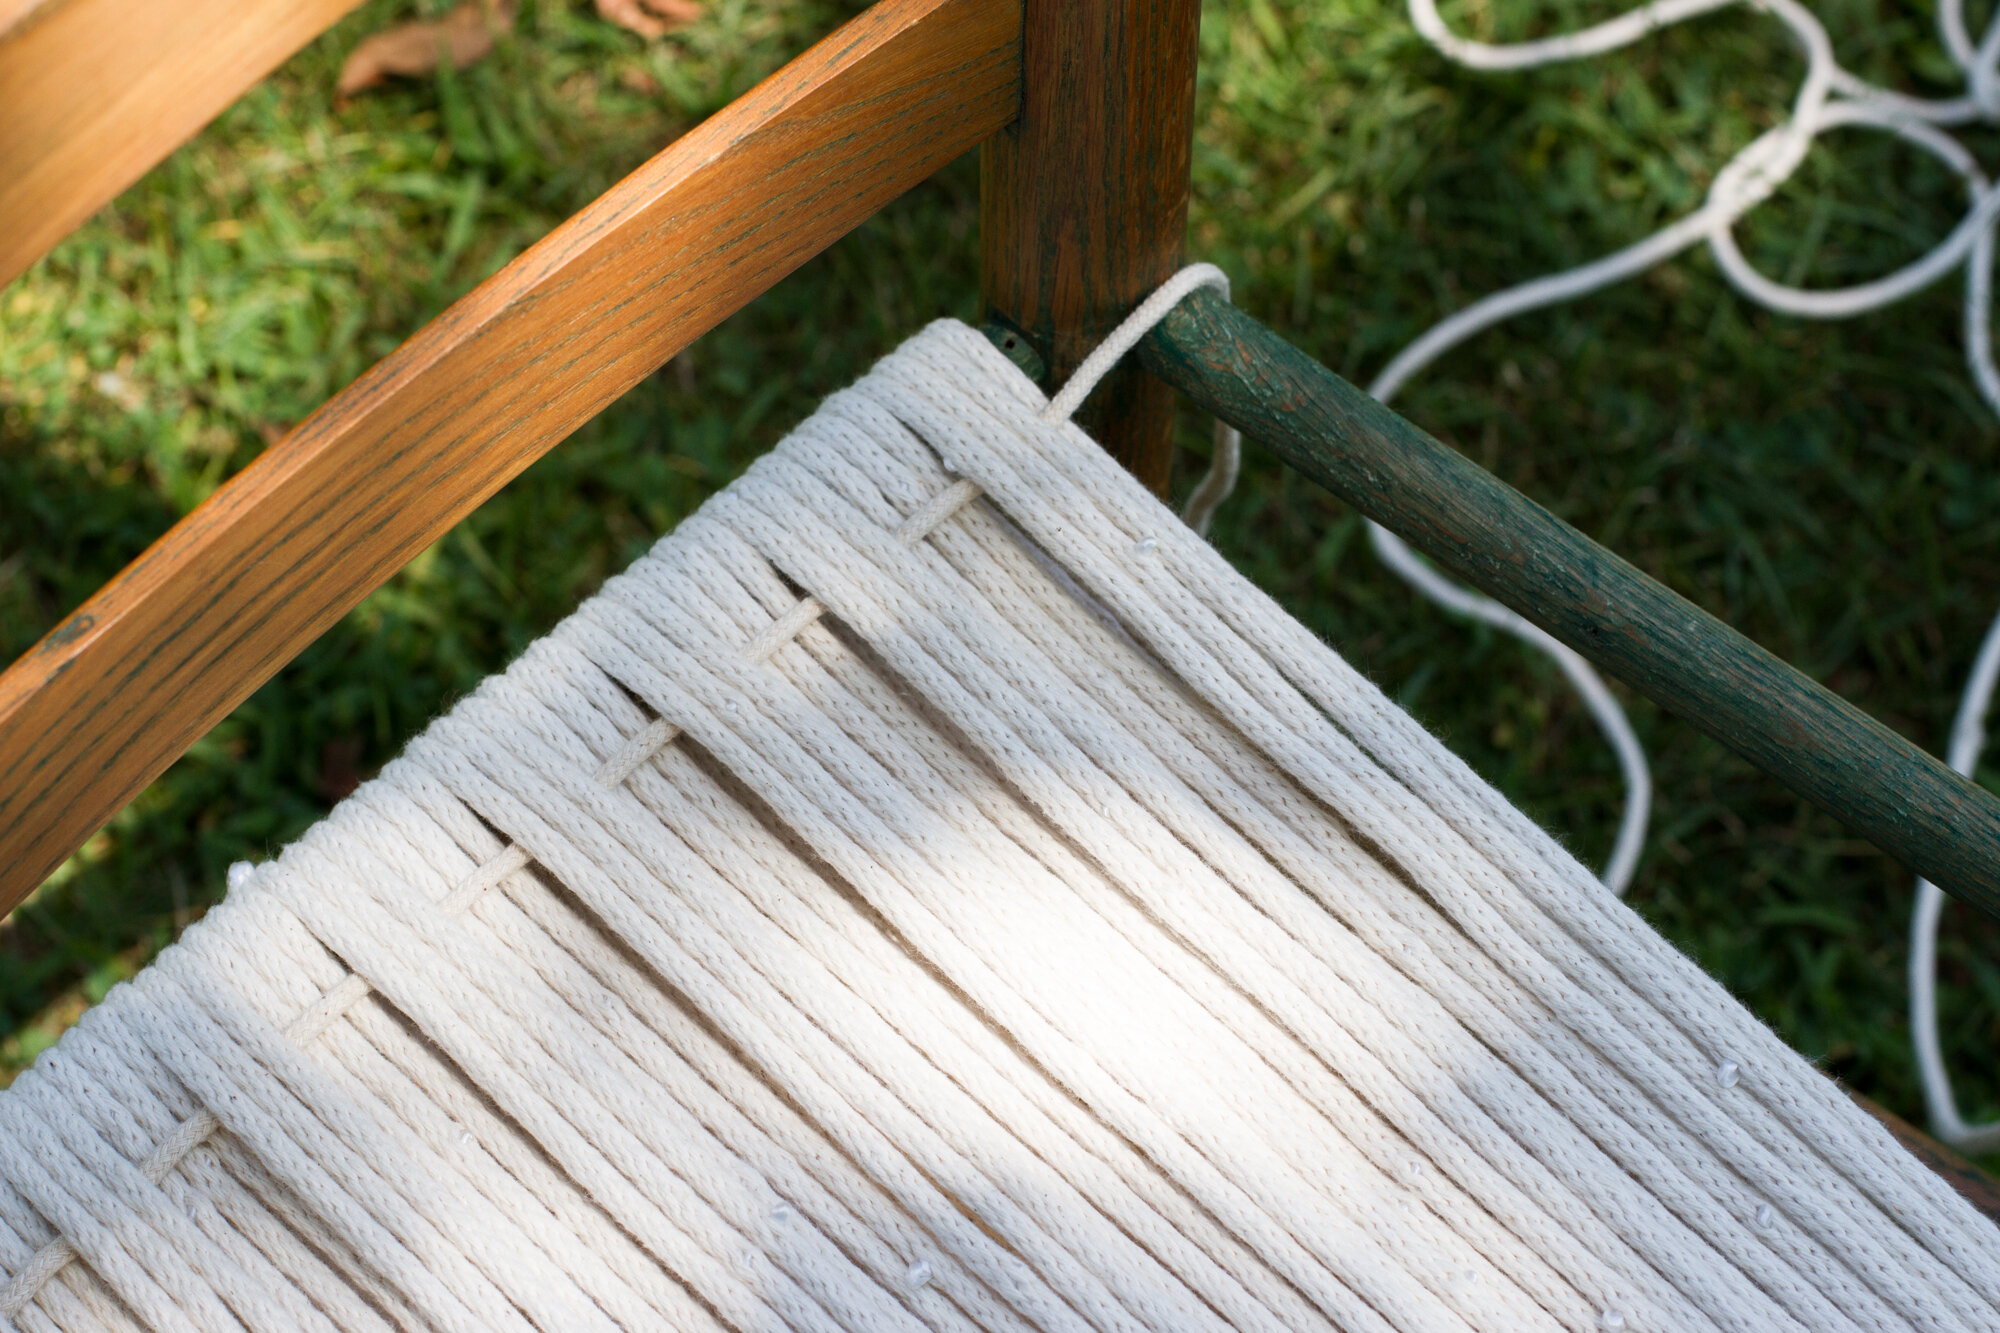 weaving a new chair seat with clothesline | reading my tea leaves